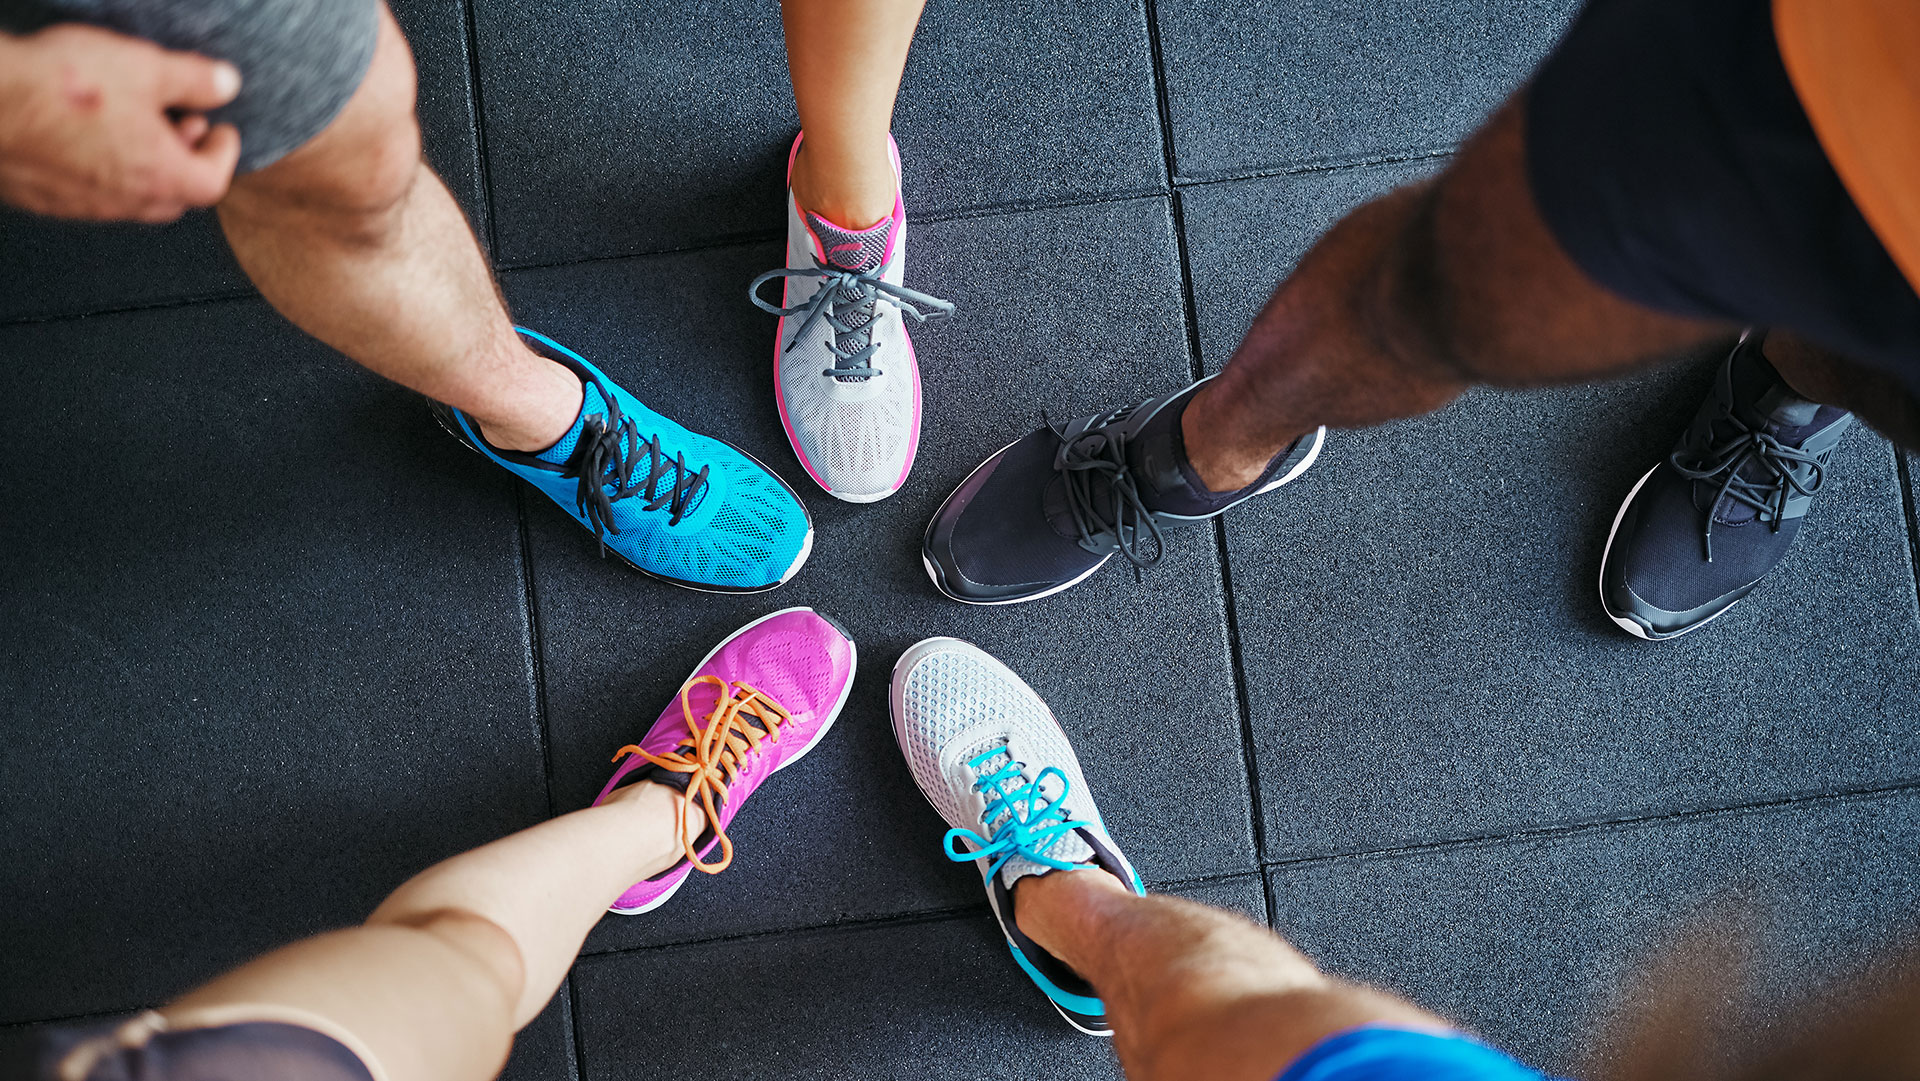 A Coaches Guide for New Runners on getting the right shoes